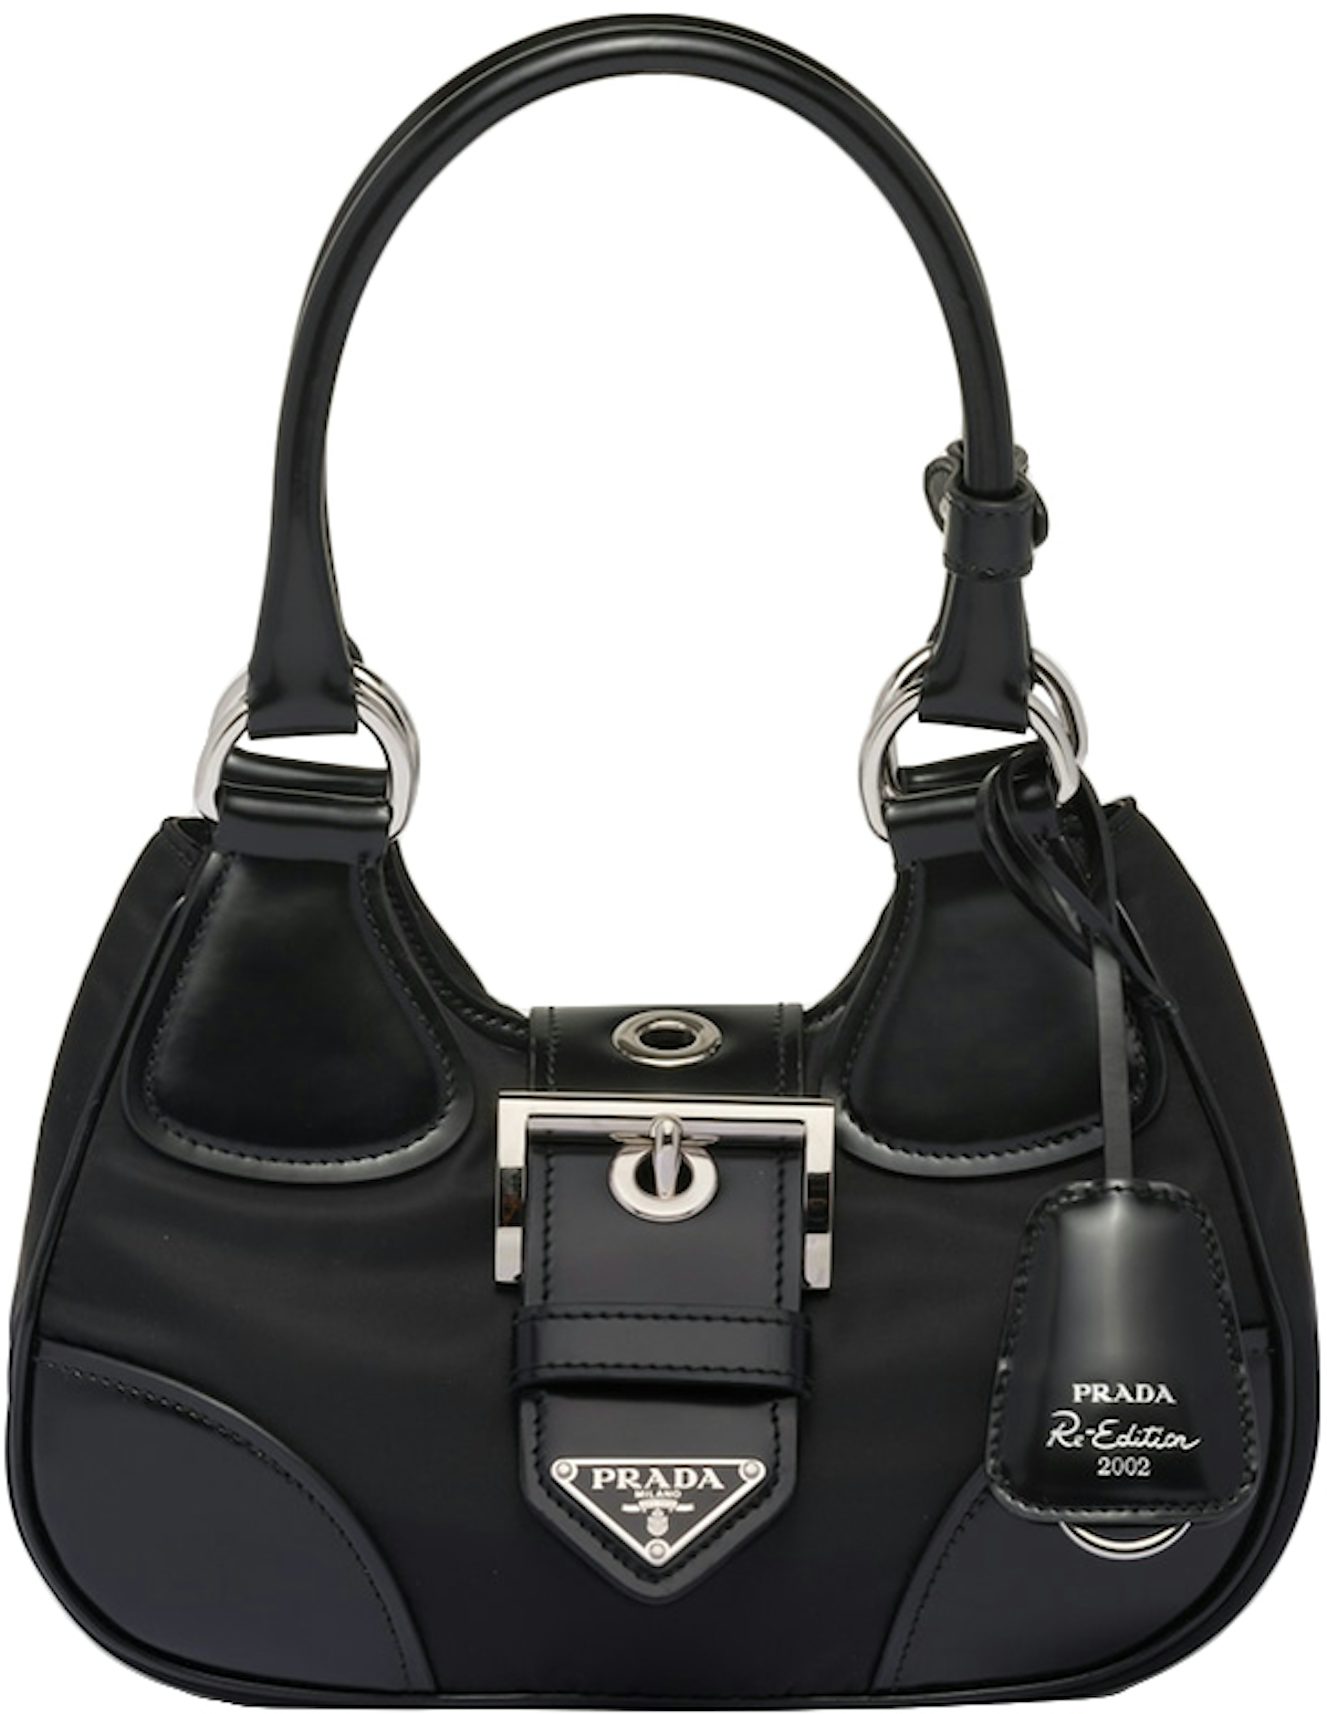 Prada Re-Nylon and Saffiano Leather Shoulder Bag Navy in Fabric